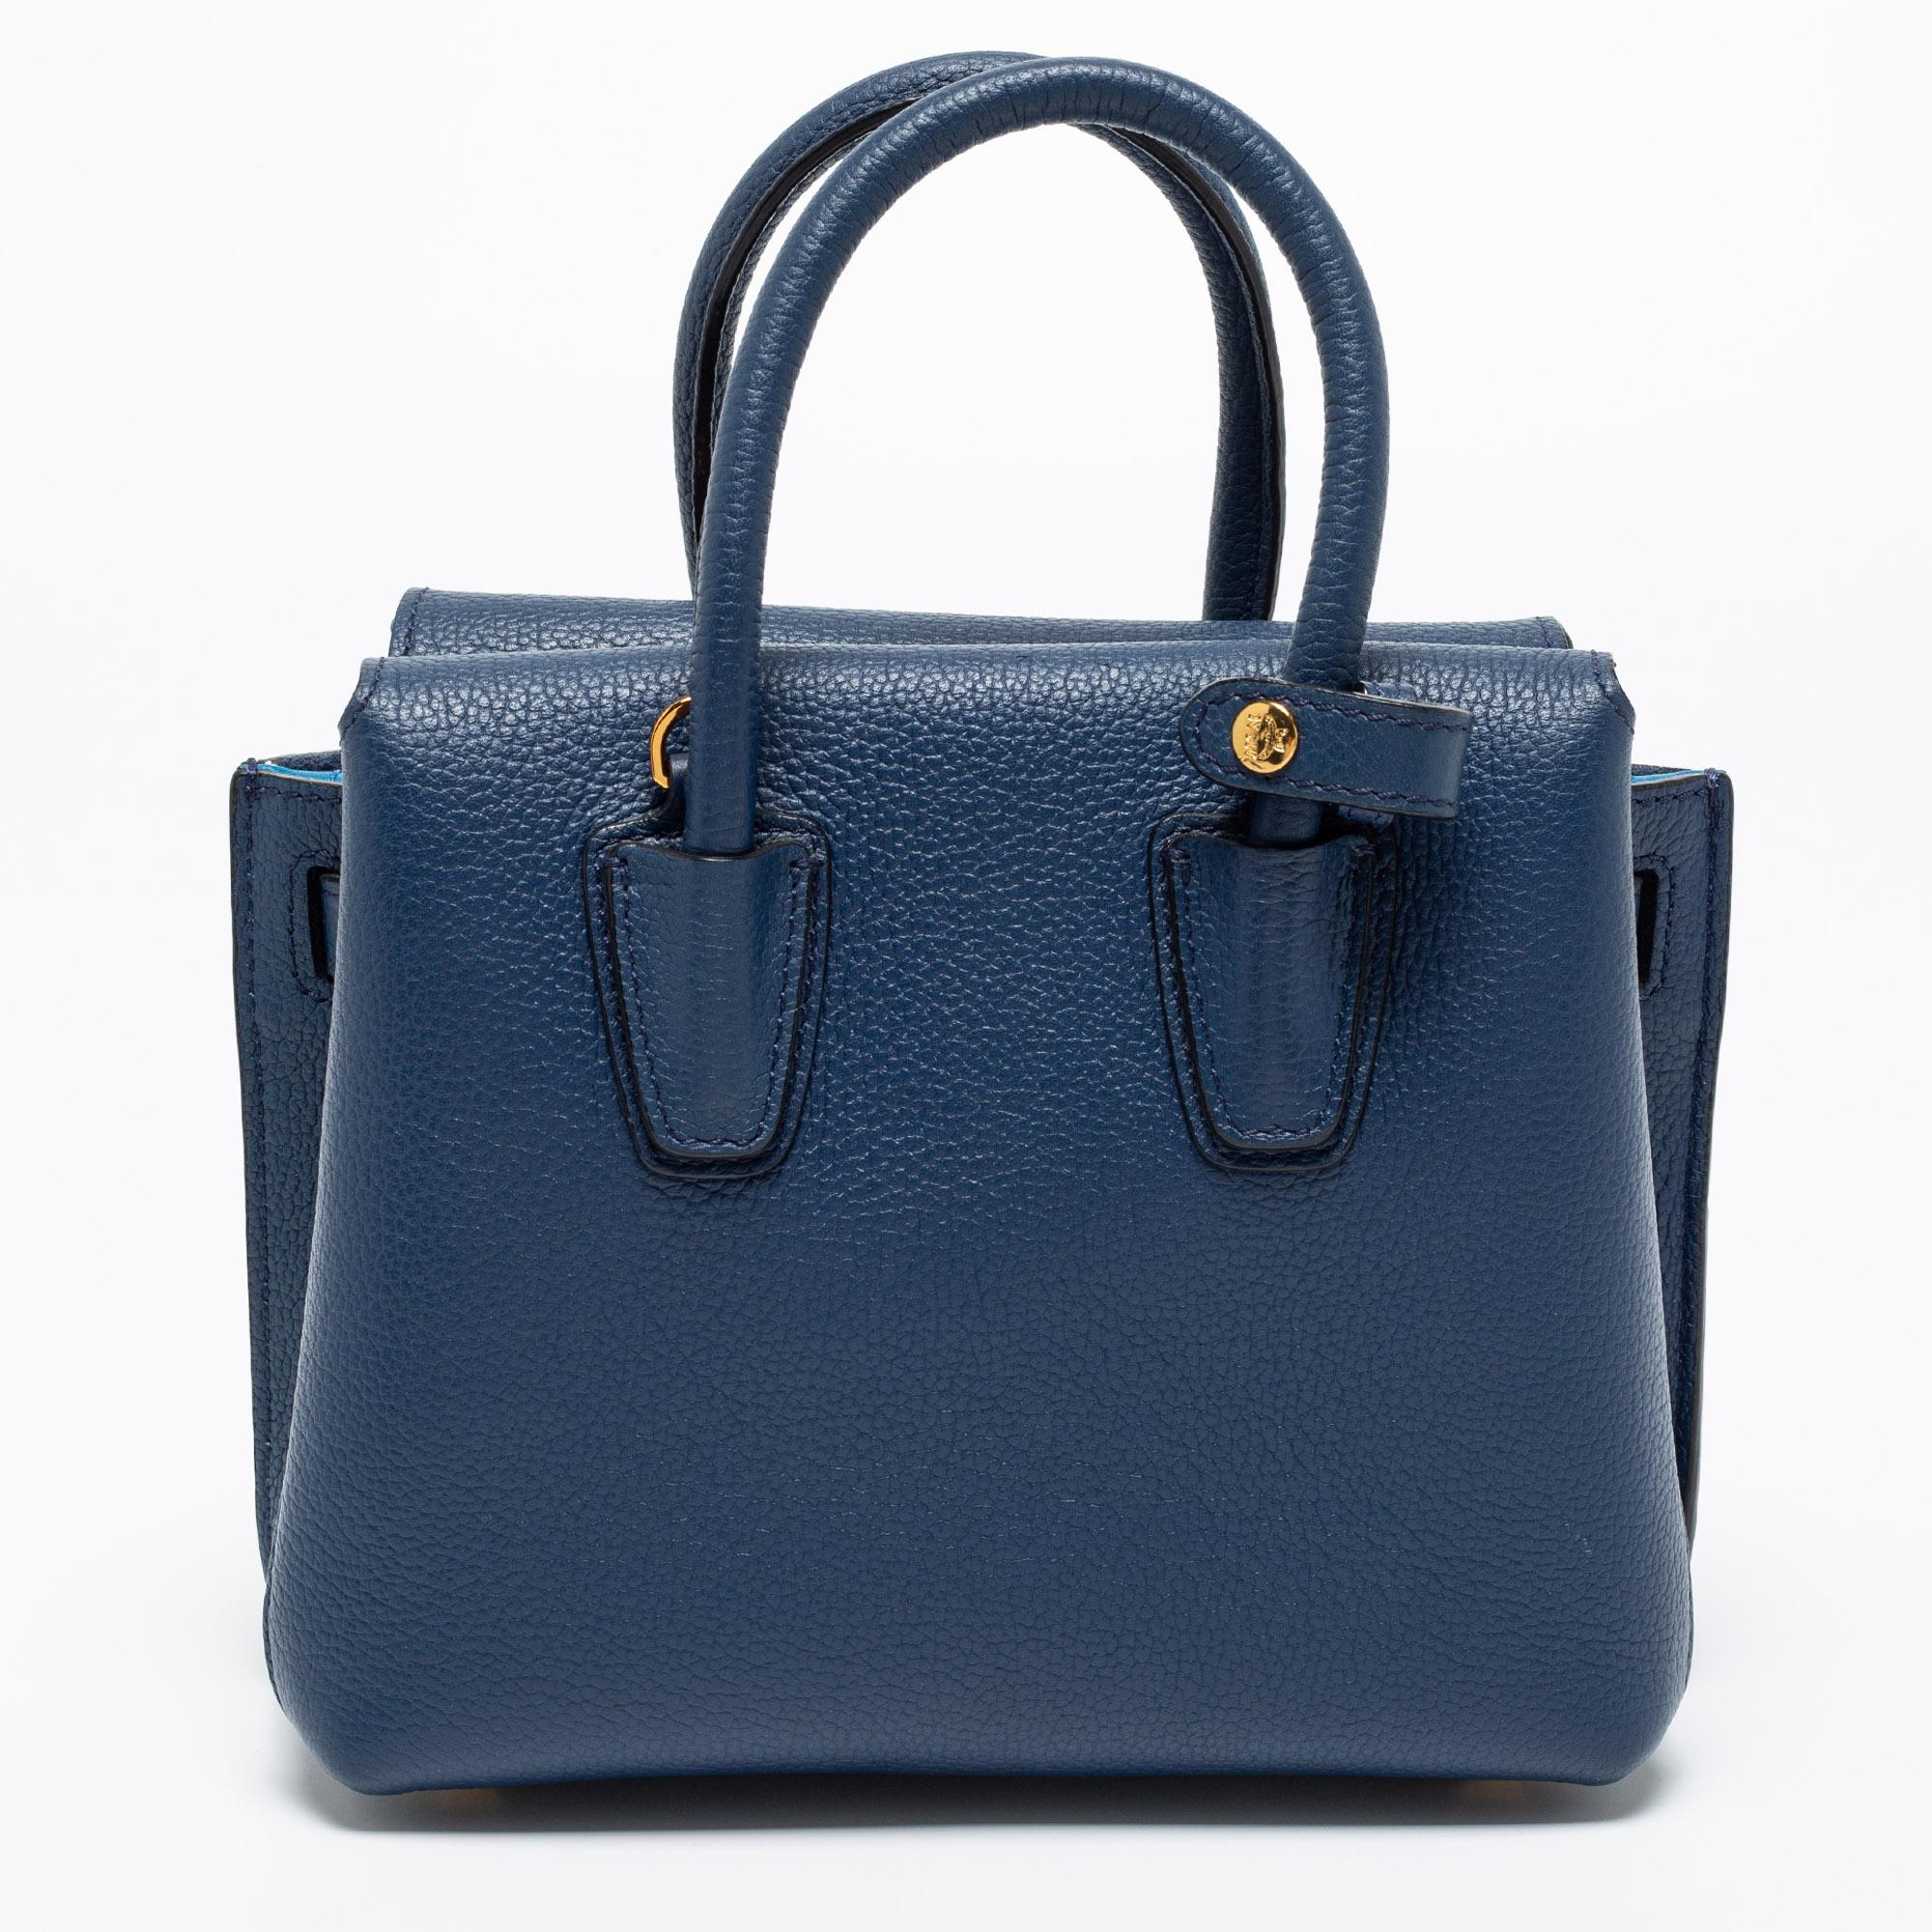 Flaunt your unique aesthetics in fashion with this fabulous Milla Park Avenue tote from MCM. It is crafted from blue leather on the exterior and features gold-toned hardware and an Alcantara-lined interior. This tote is supported by dual